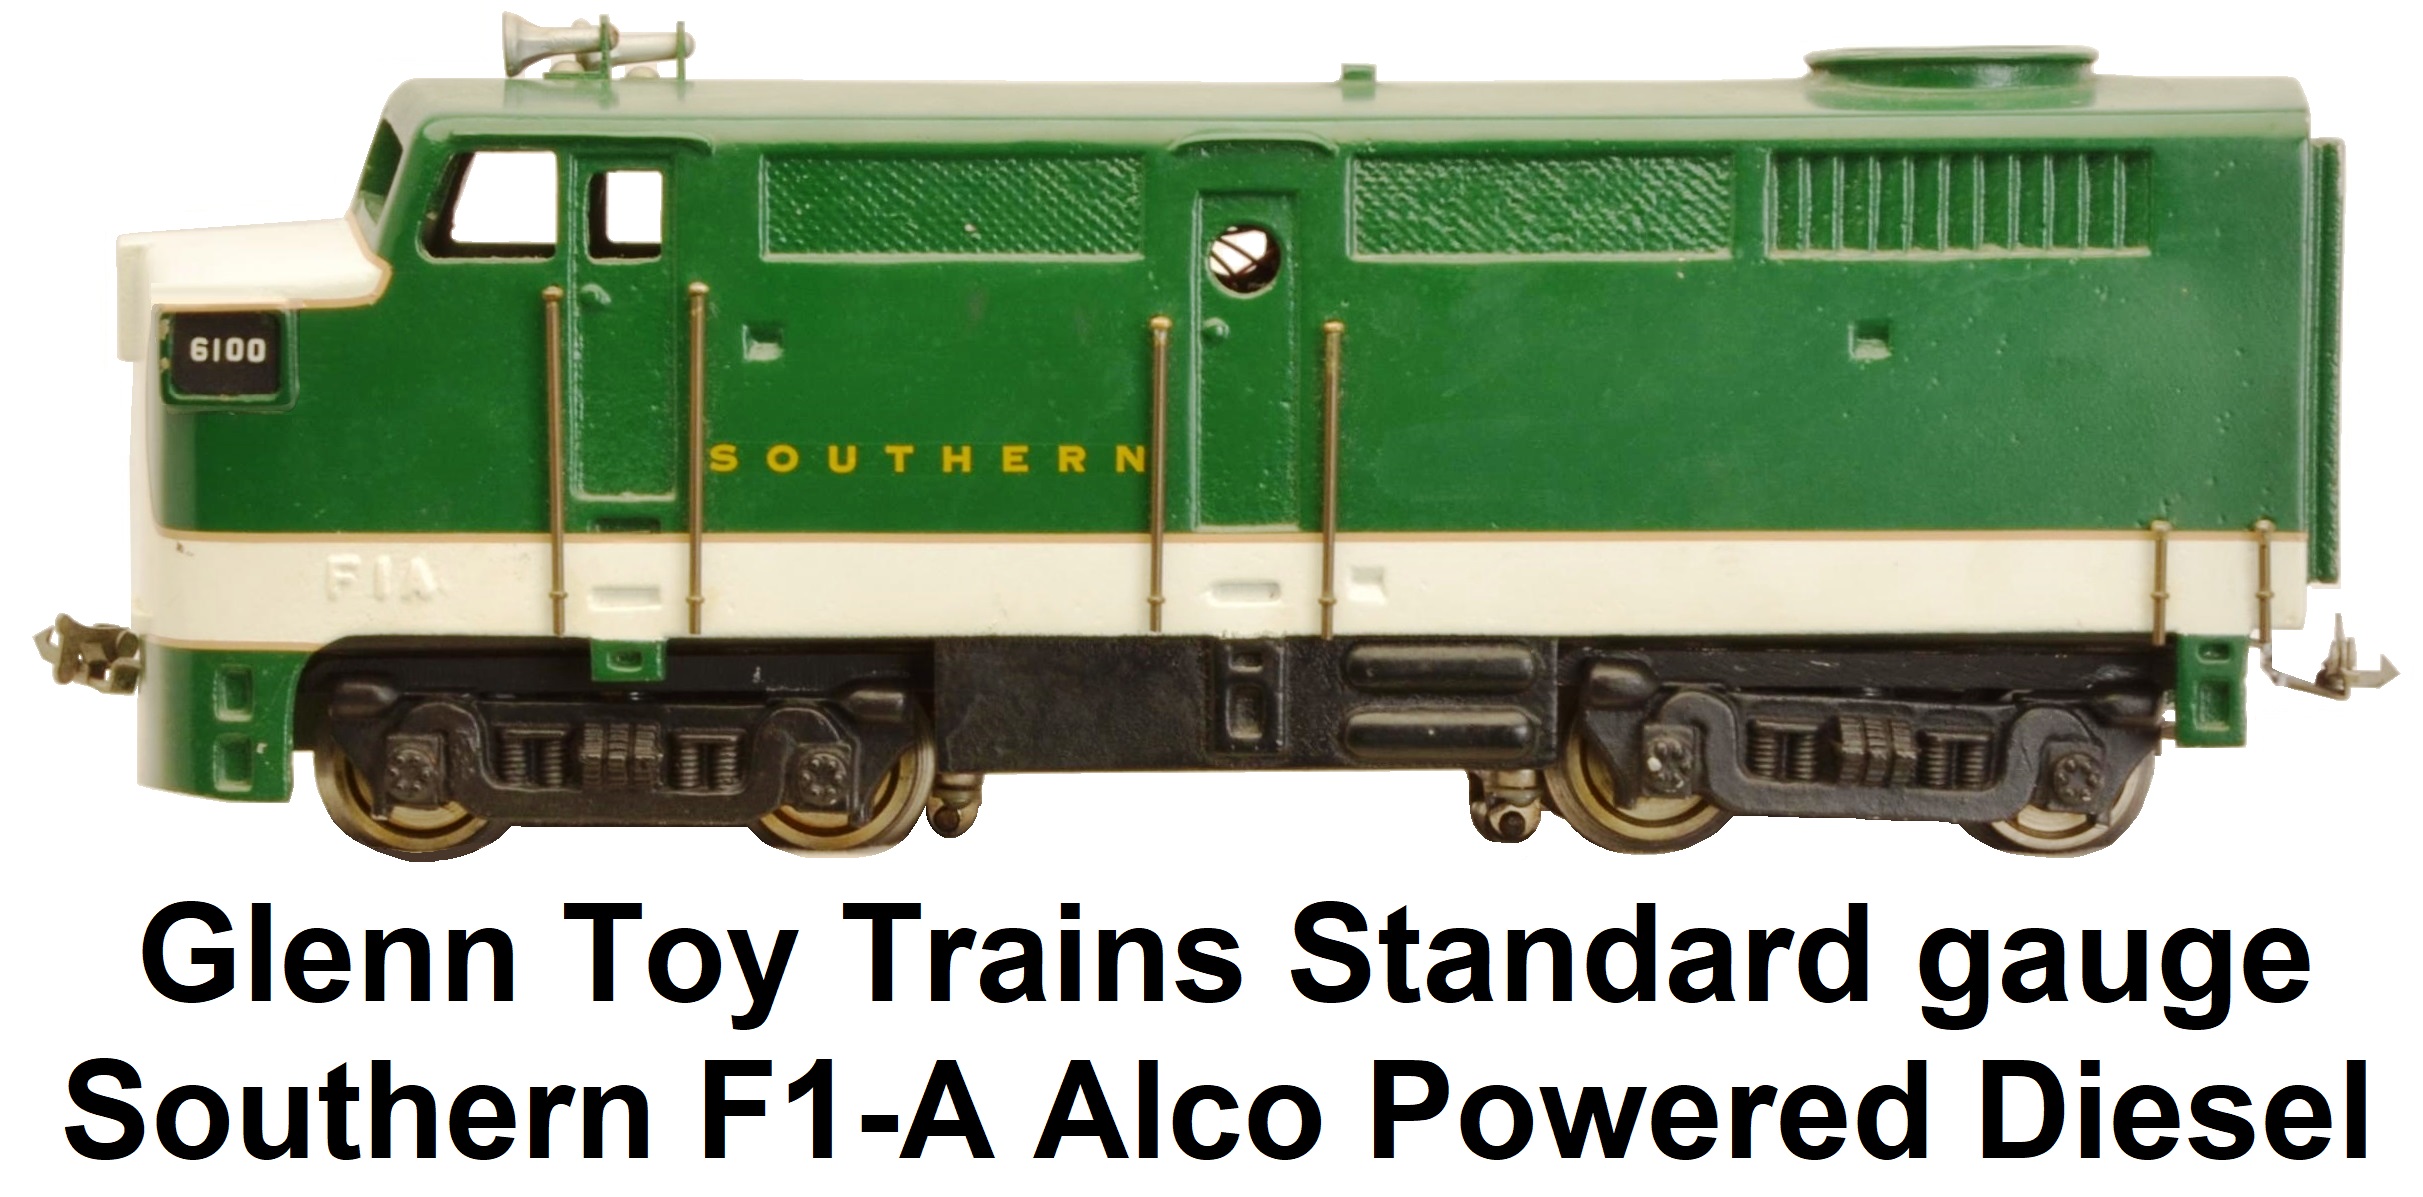 Glenn Toy Trains Standard gauge Green and White Southern F1-A Powered Diesel